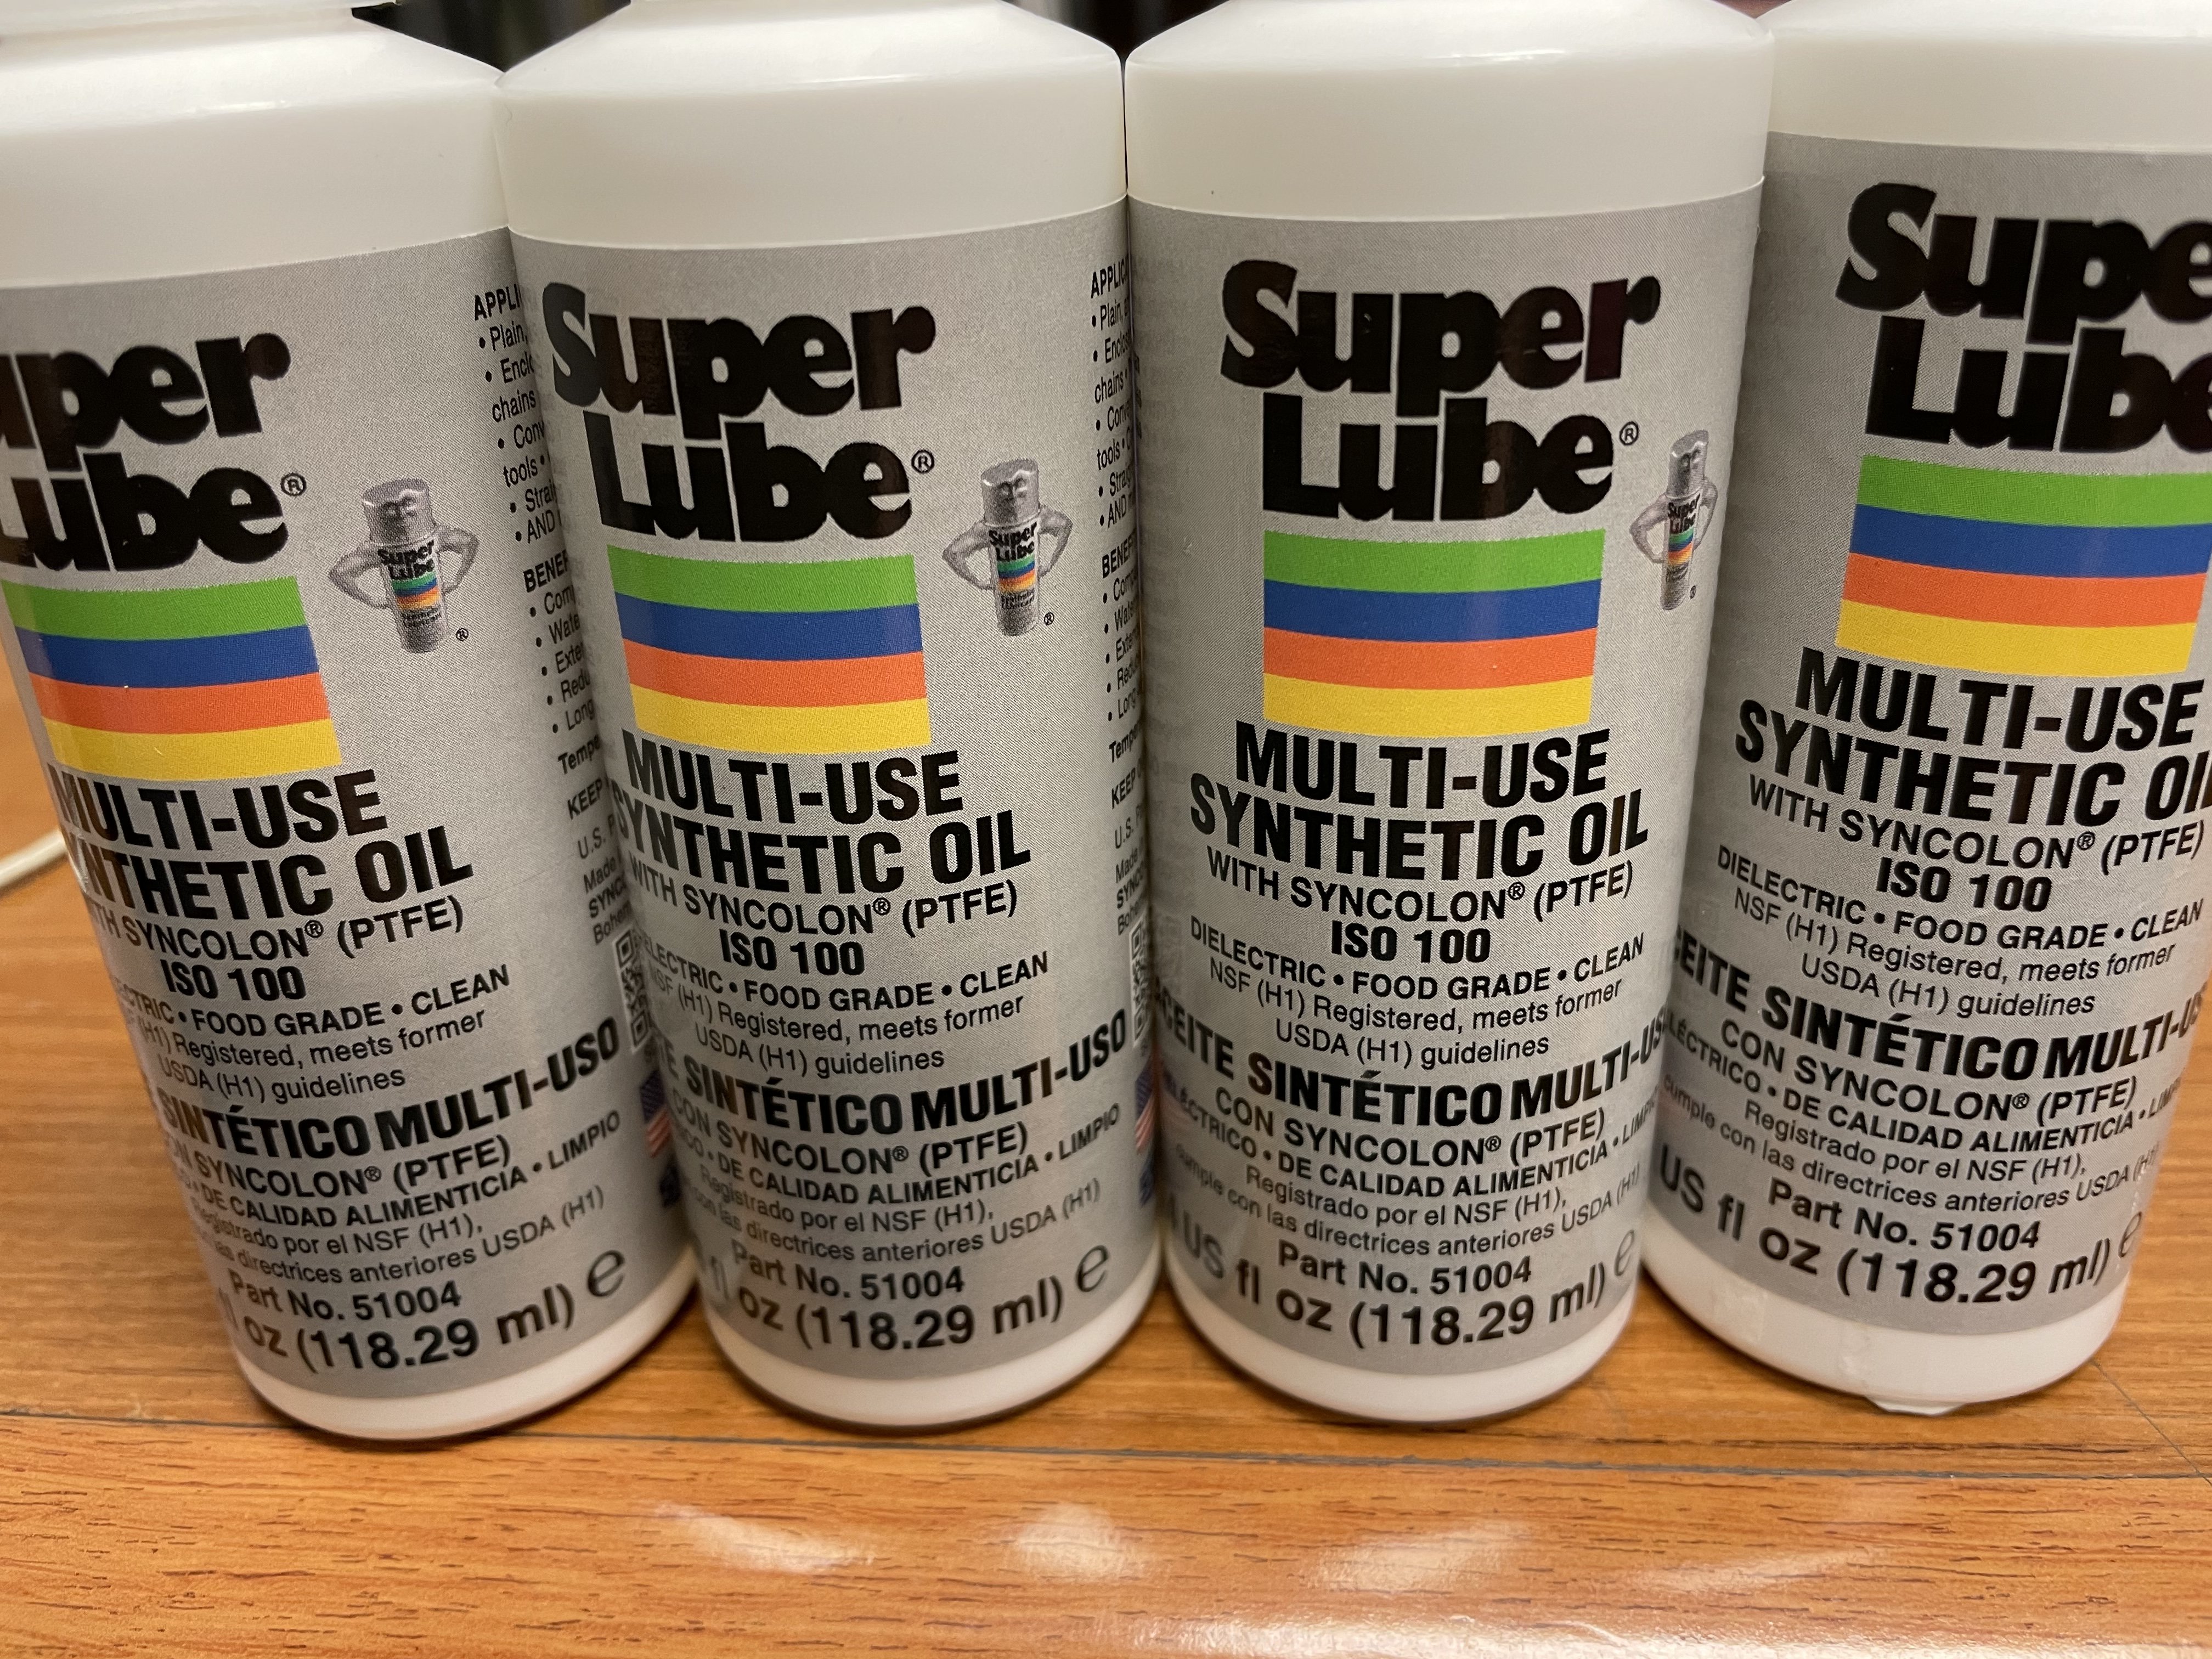 Super Lube 21030 Synthetic Grease PTFE Lubricant Dielectric USDA H-1 Tube 3  oz